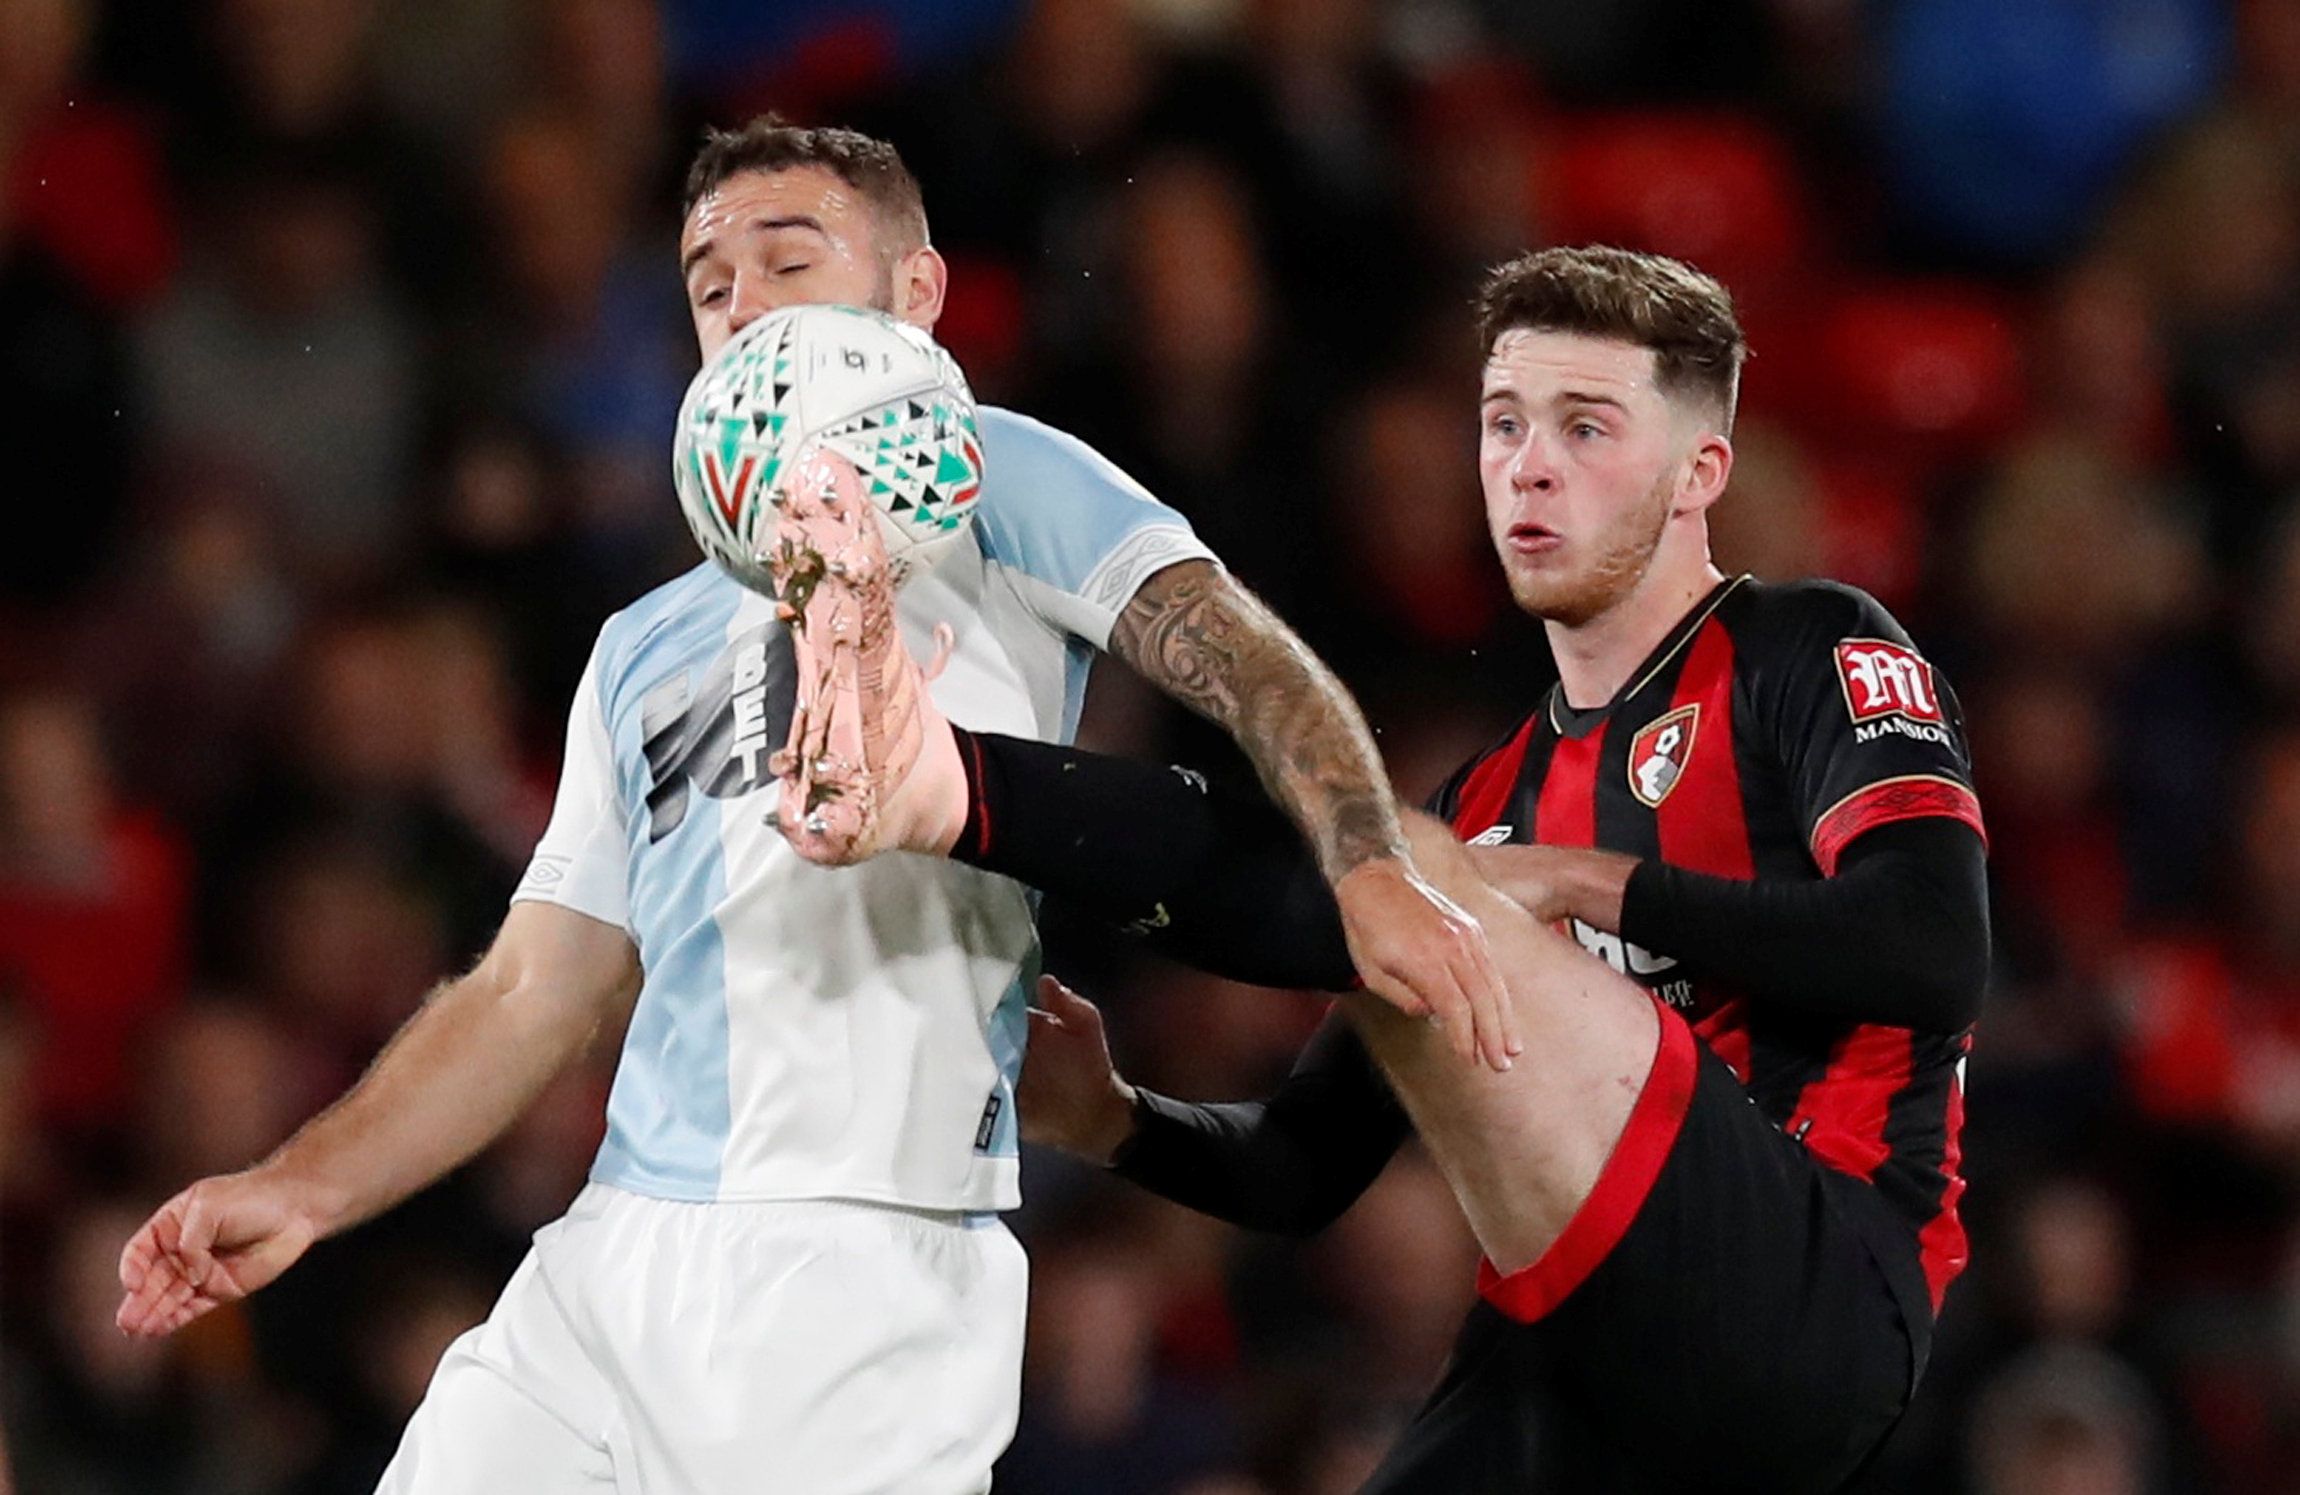 Soccer Football - Carabao Cup - Third Round - AFC Bournemouth v Blackburn Rovers - Vitality Stadium, Bournemouth, Britain - September 25, 2018  Blackburn Rovers' Adam Armstrong in action with Bournemouth's Jack Simpson          Action Images via Reuters/Peter Cziborra  EDITORIAL USE ONLY. No use with unauthorized audio, video, data, fixture lists, club/league logos or 